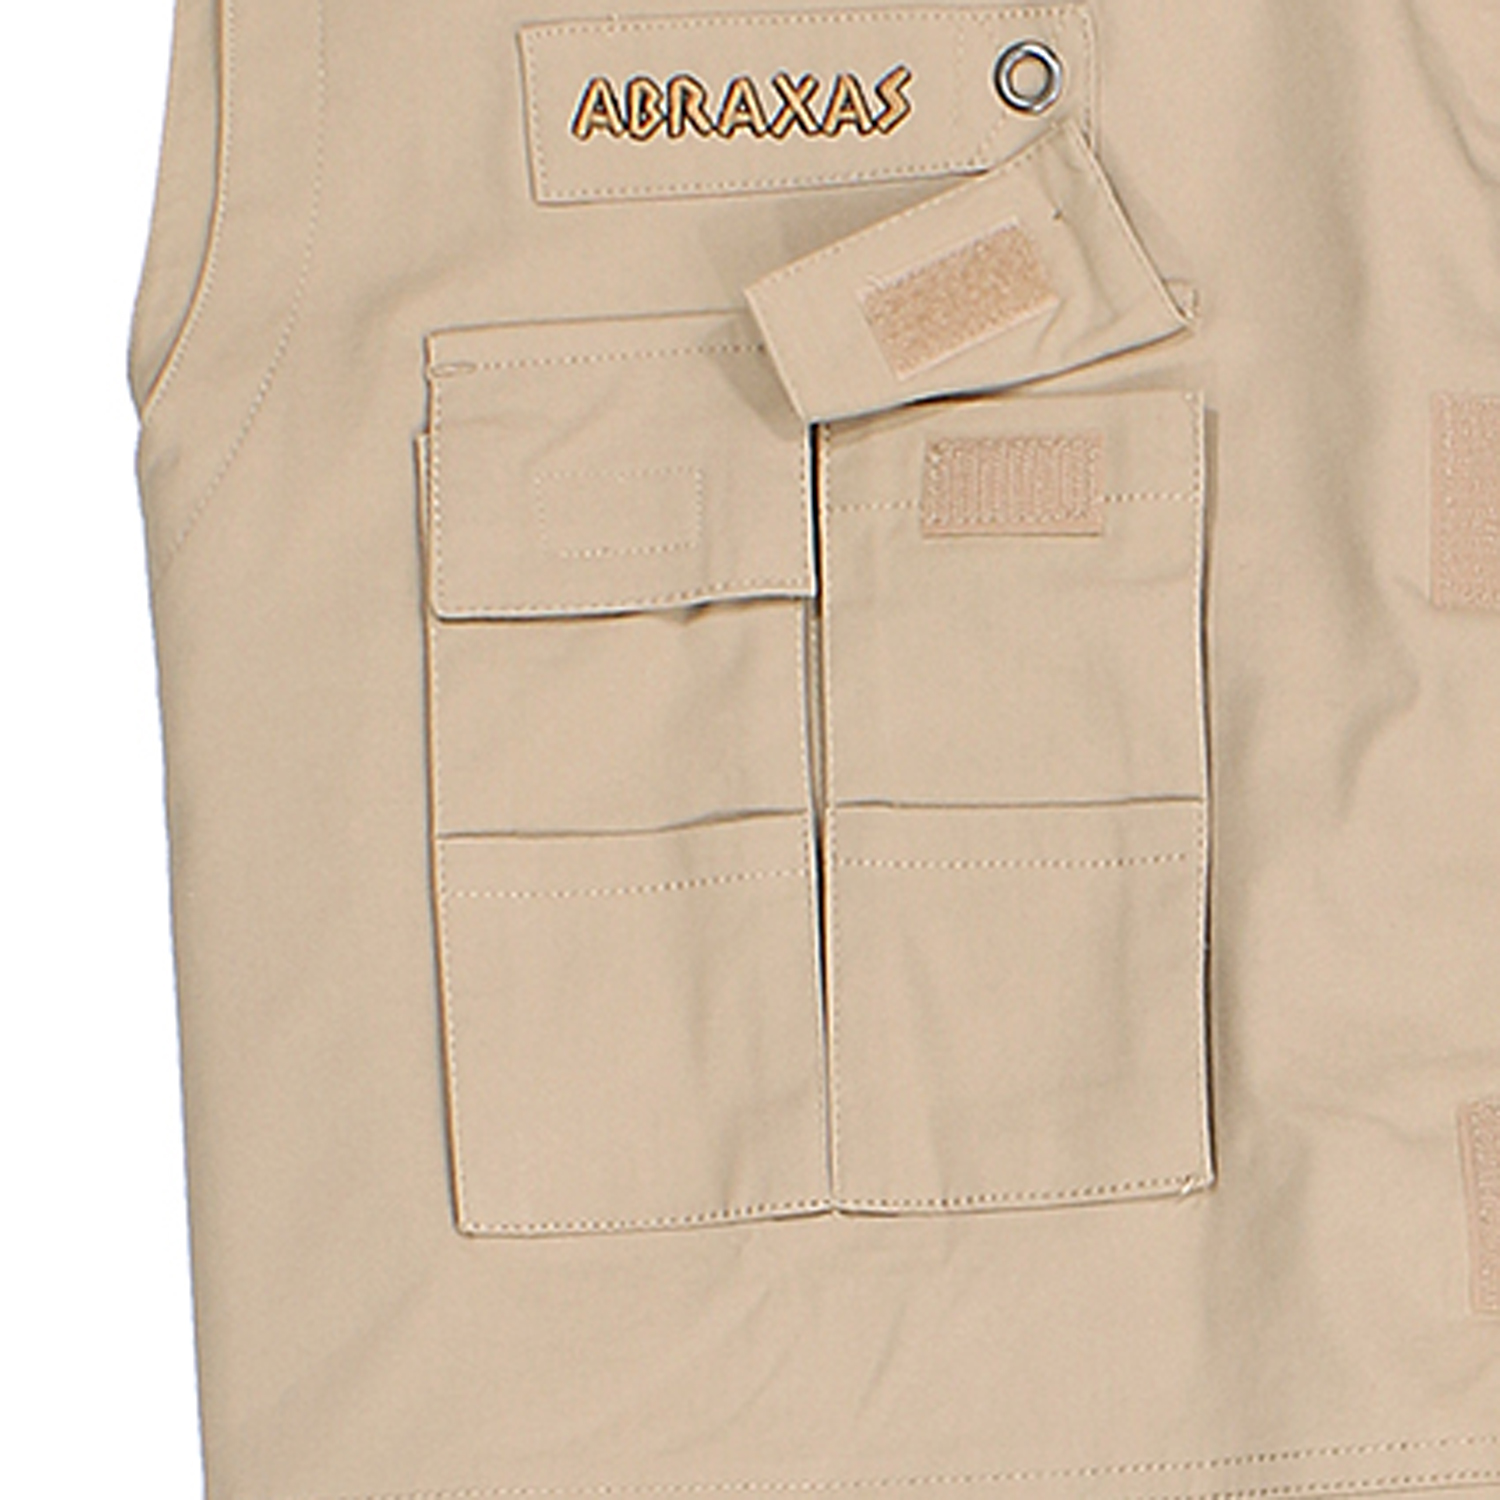 Outdoor vest in sand by Abraxas in oversizes up to 10XL